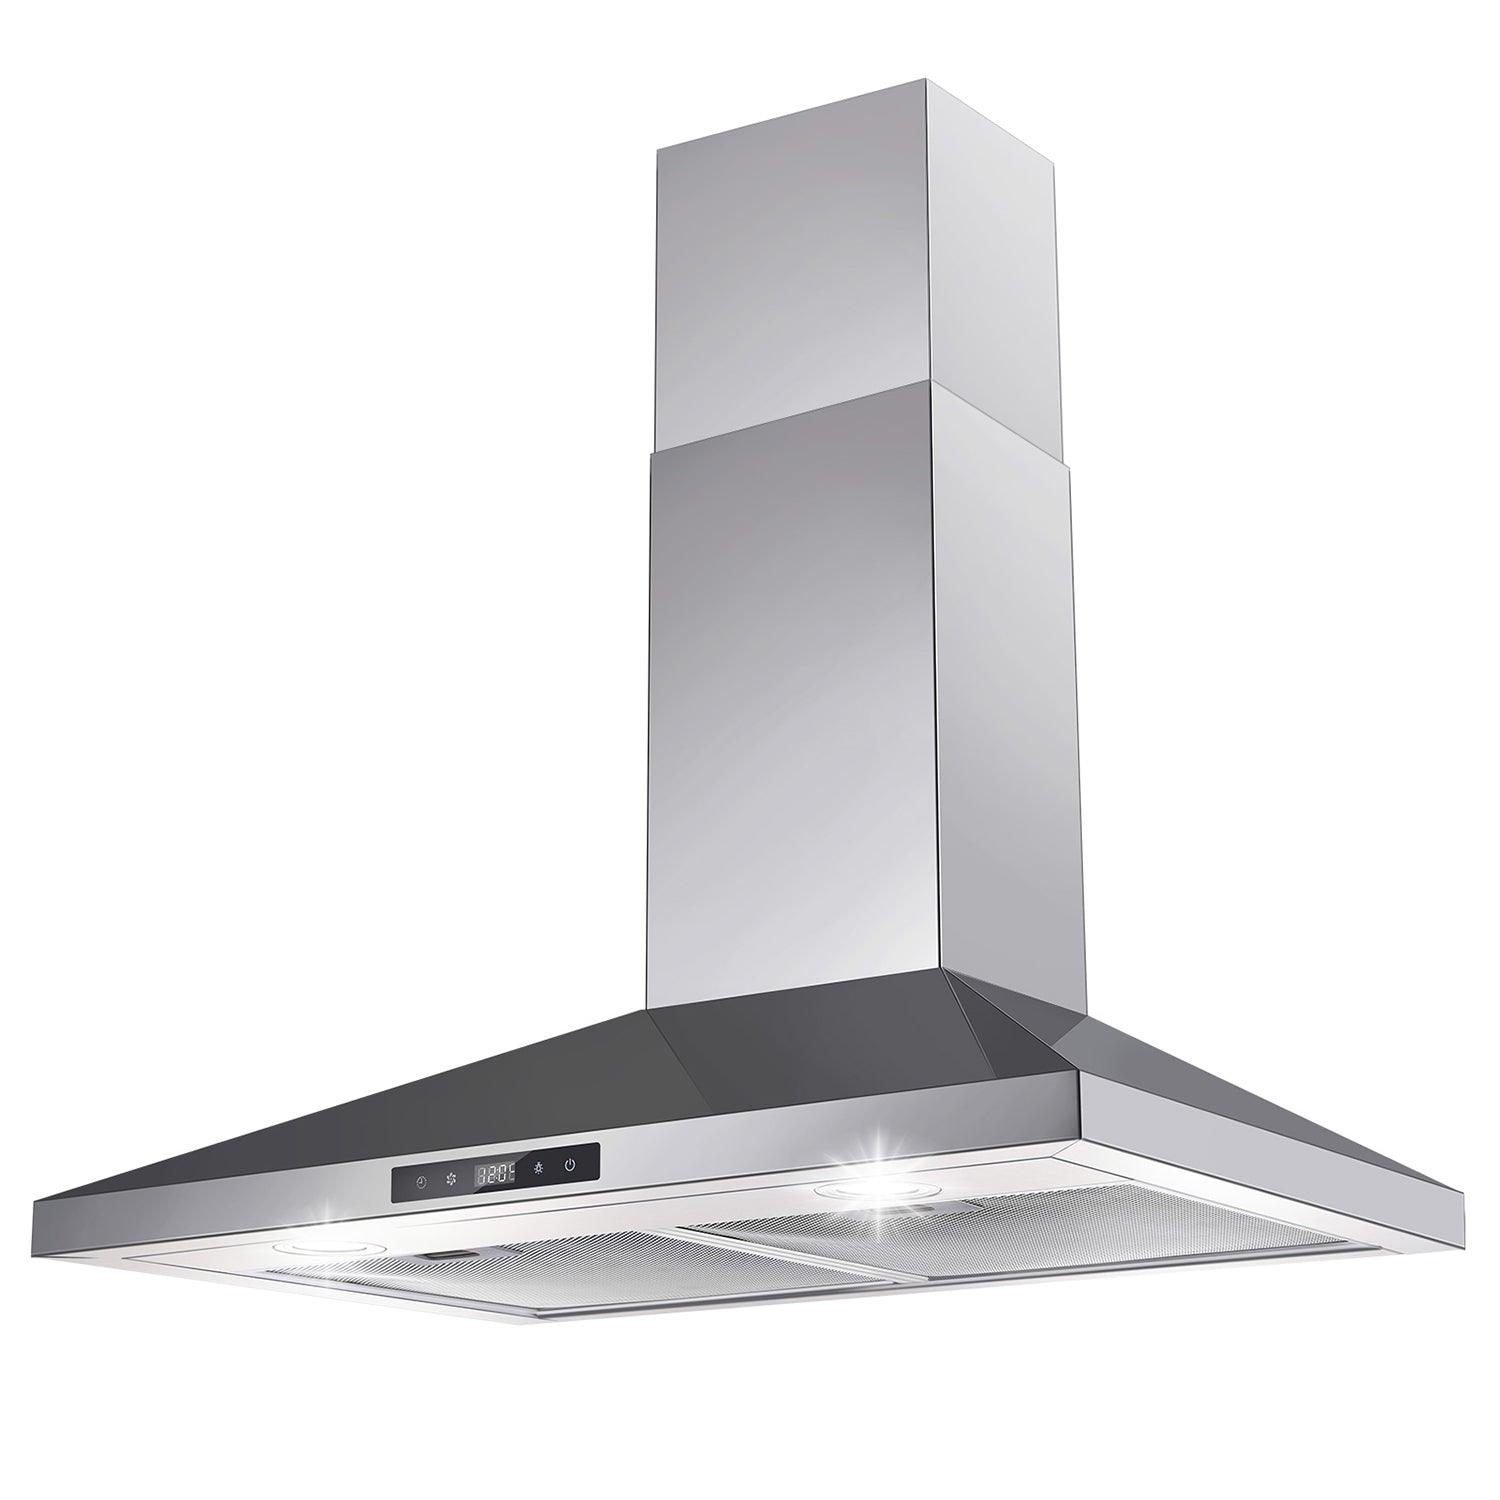 Tieasy Range Hood 30 inch Wall Mount Range Hood 450 CFM Vent Touch Control Aluminum Filters - Usys 0375A